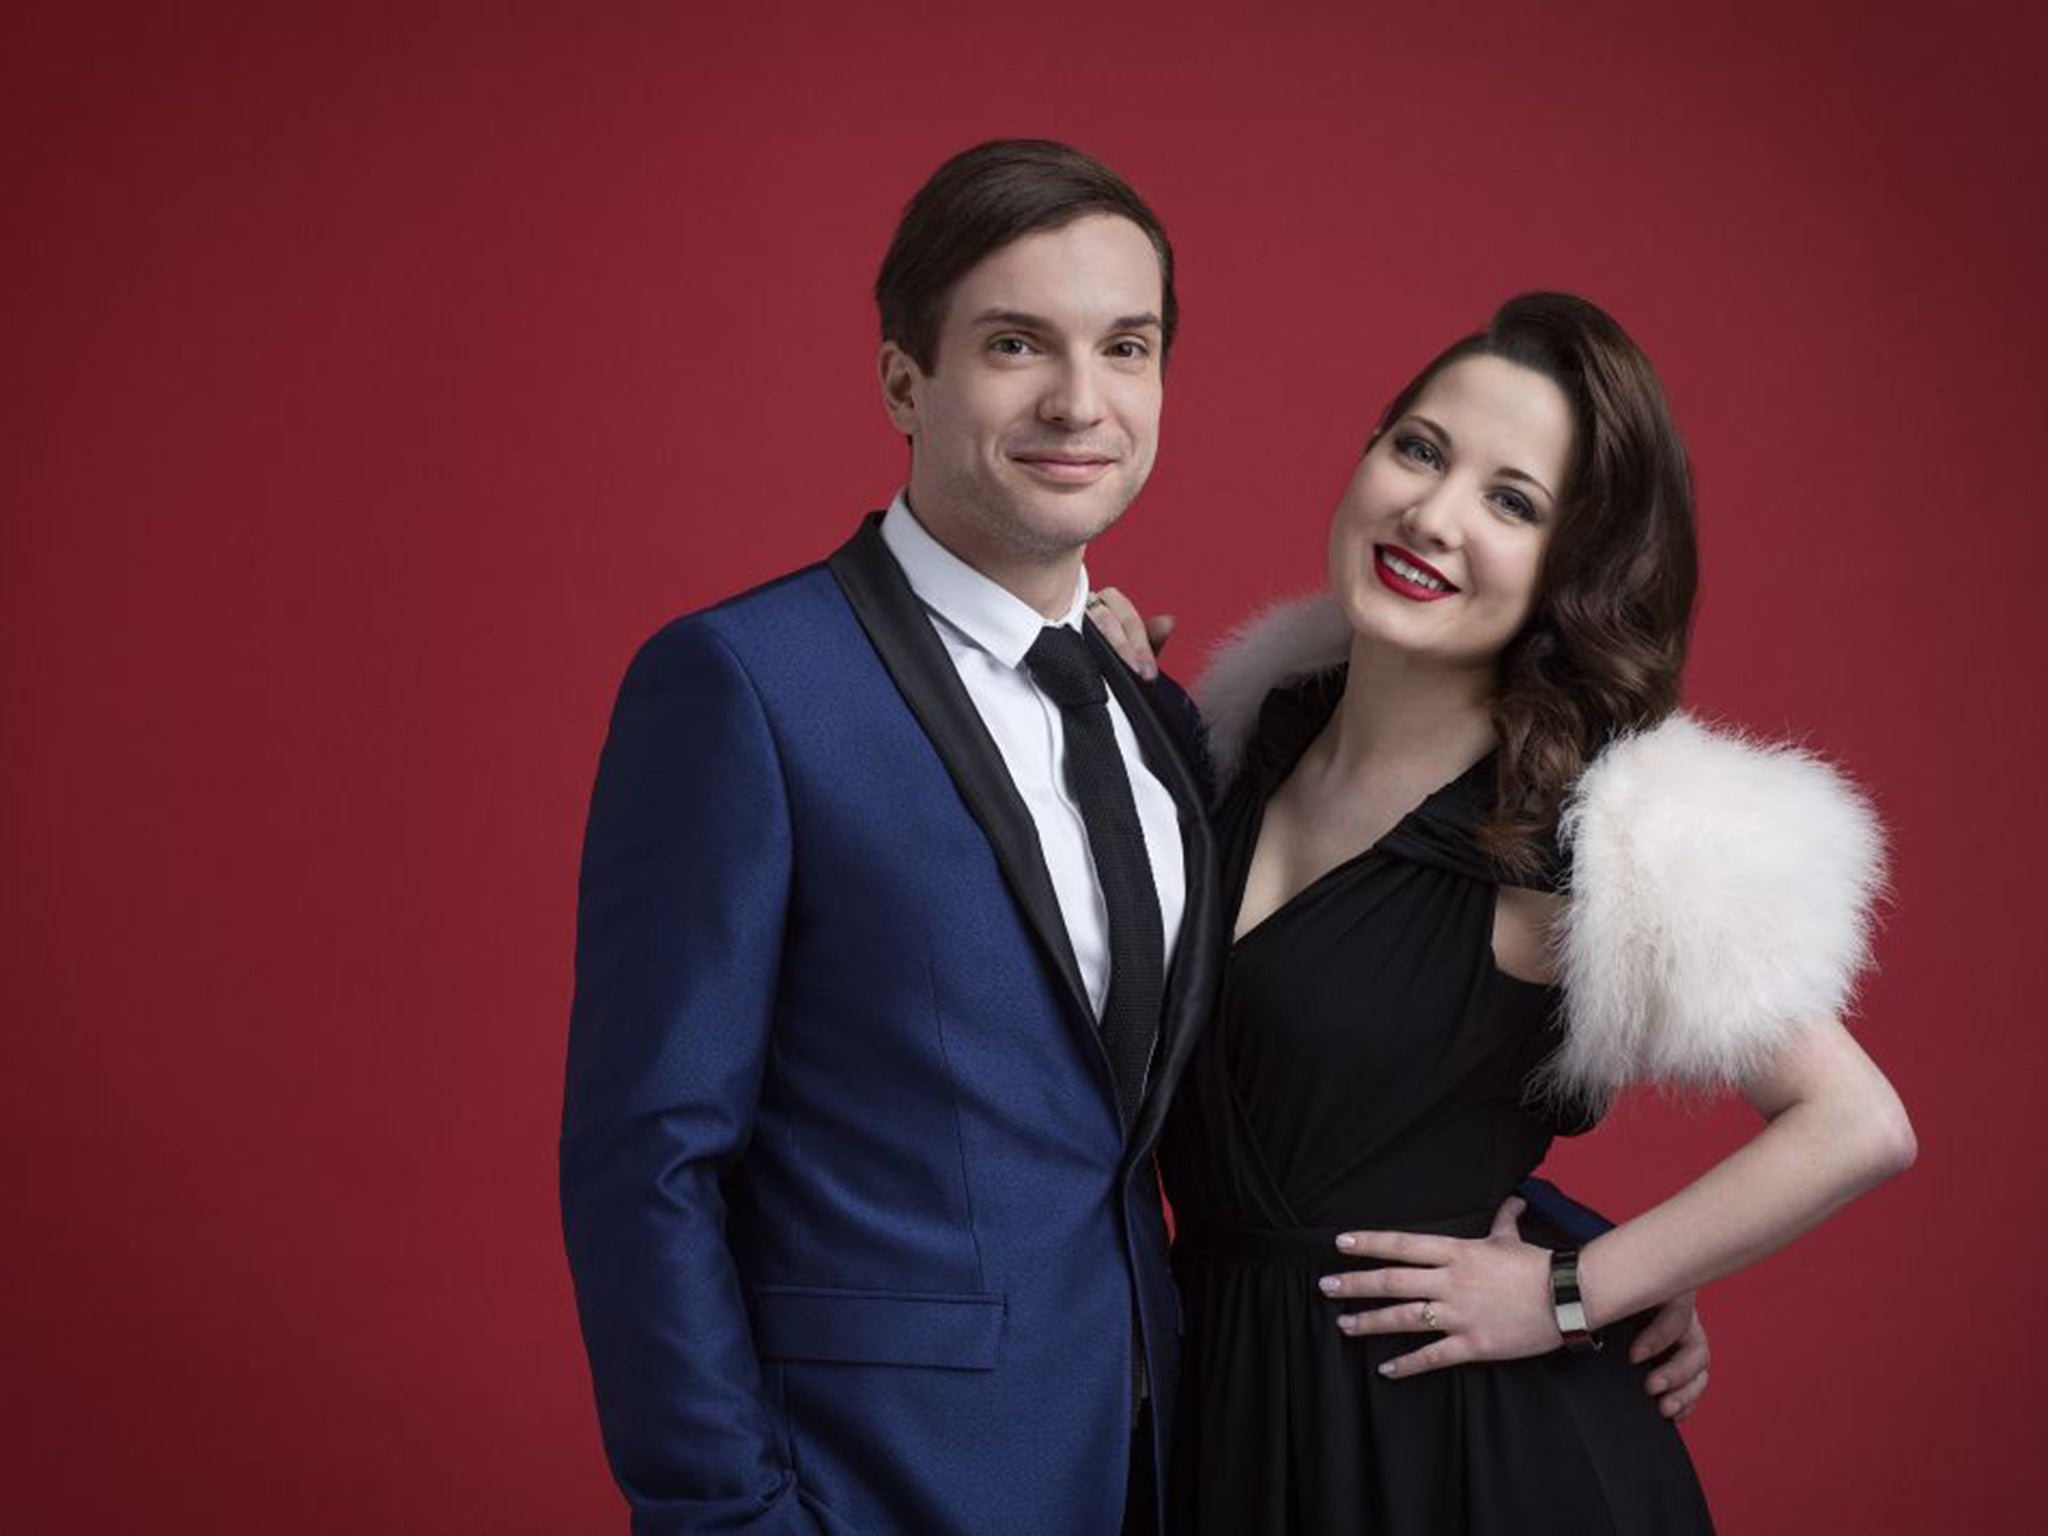 Electro Velvet, made up of Alex Larke and Bianca Nicholas, will represent the UK at the Eurovision Song Contest 2015